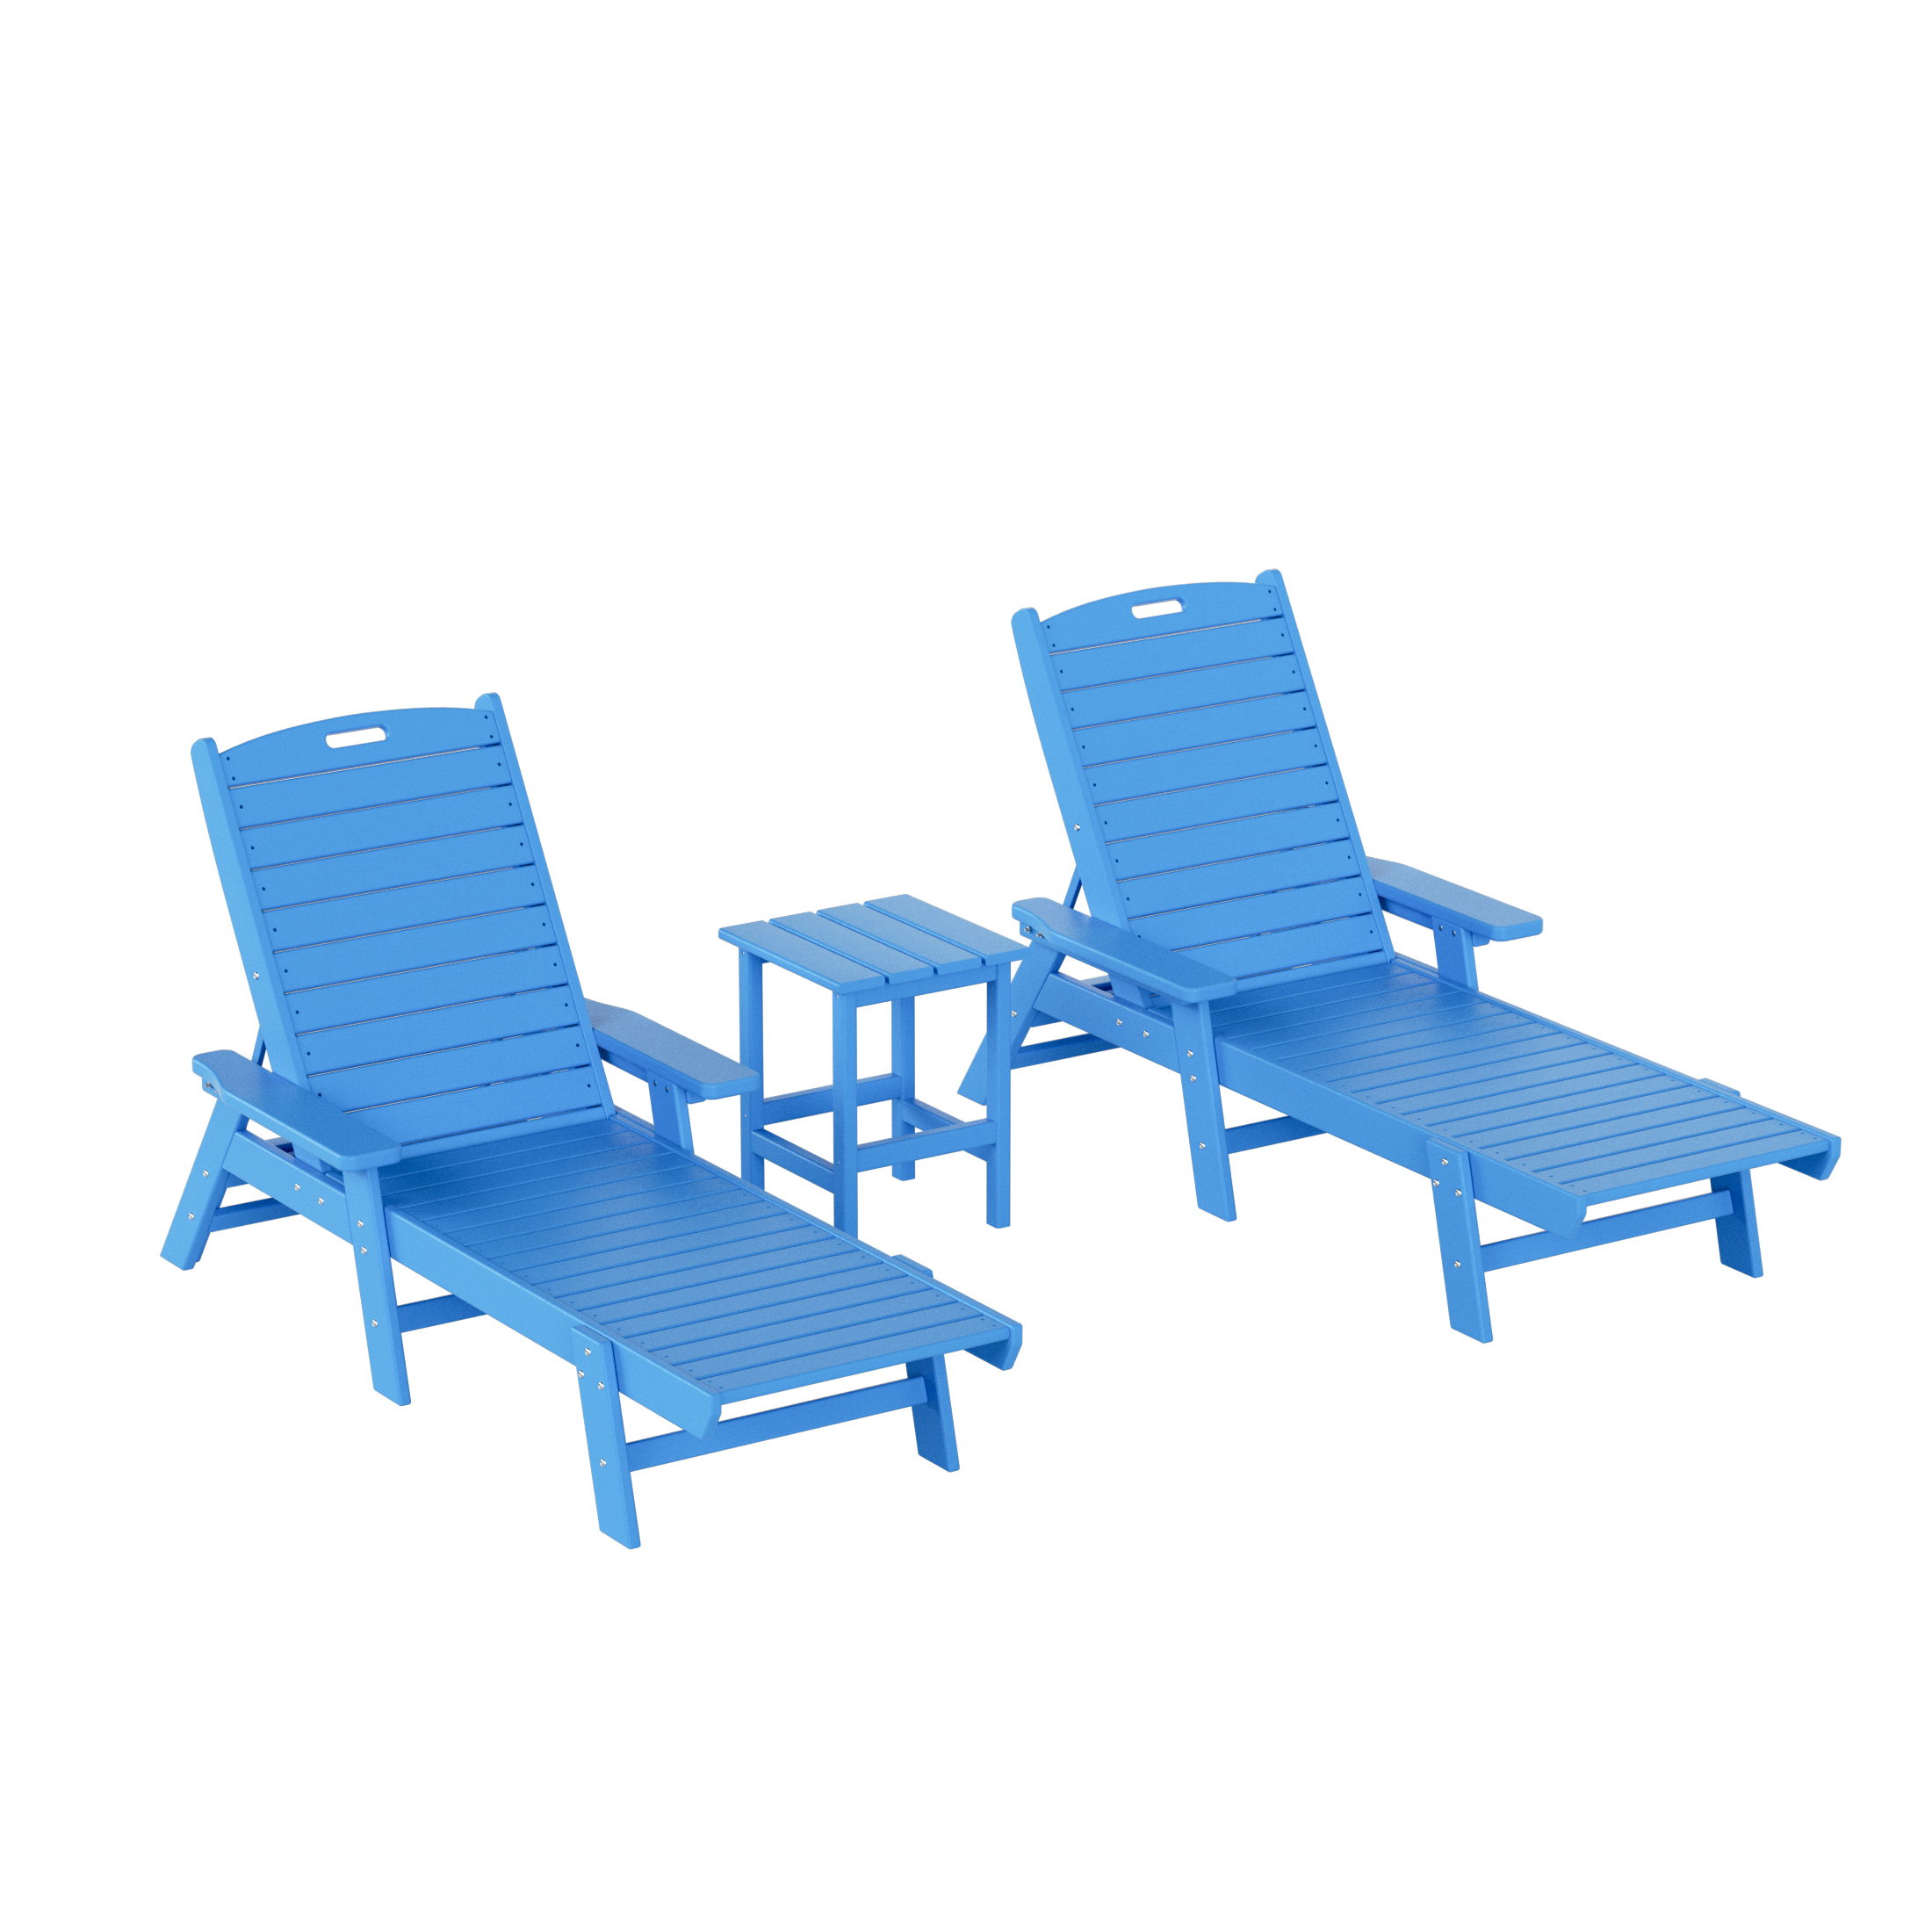 Bayport Outdoor 3PC HDPE Plastic Reclining Chaise Lounge/Table Set Pacific Blue - image 1 of 13